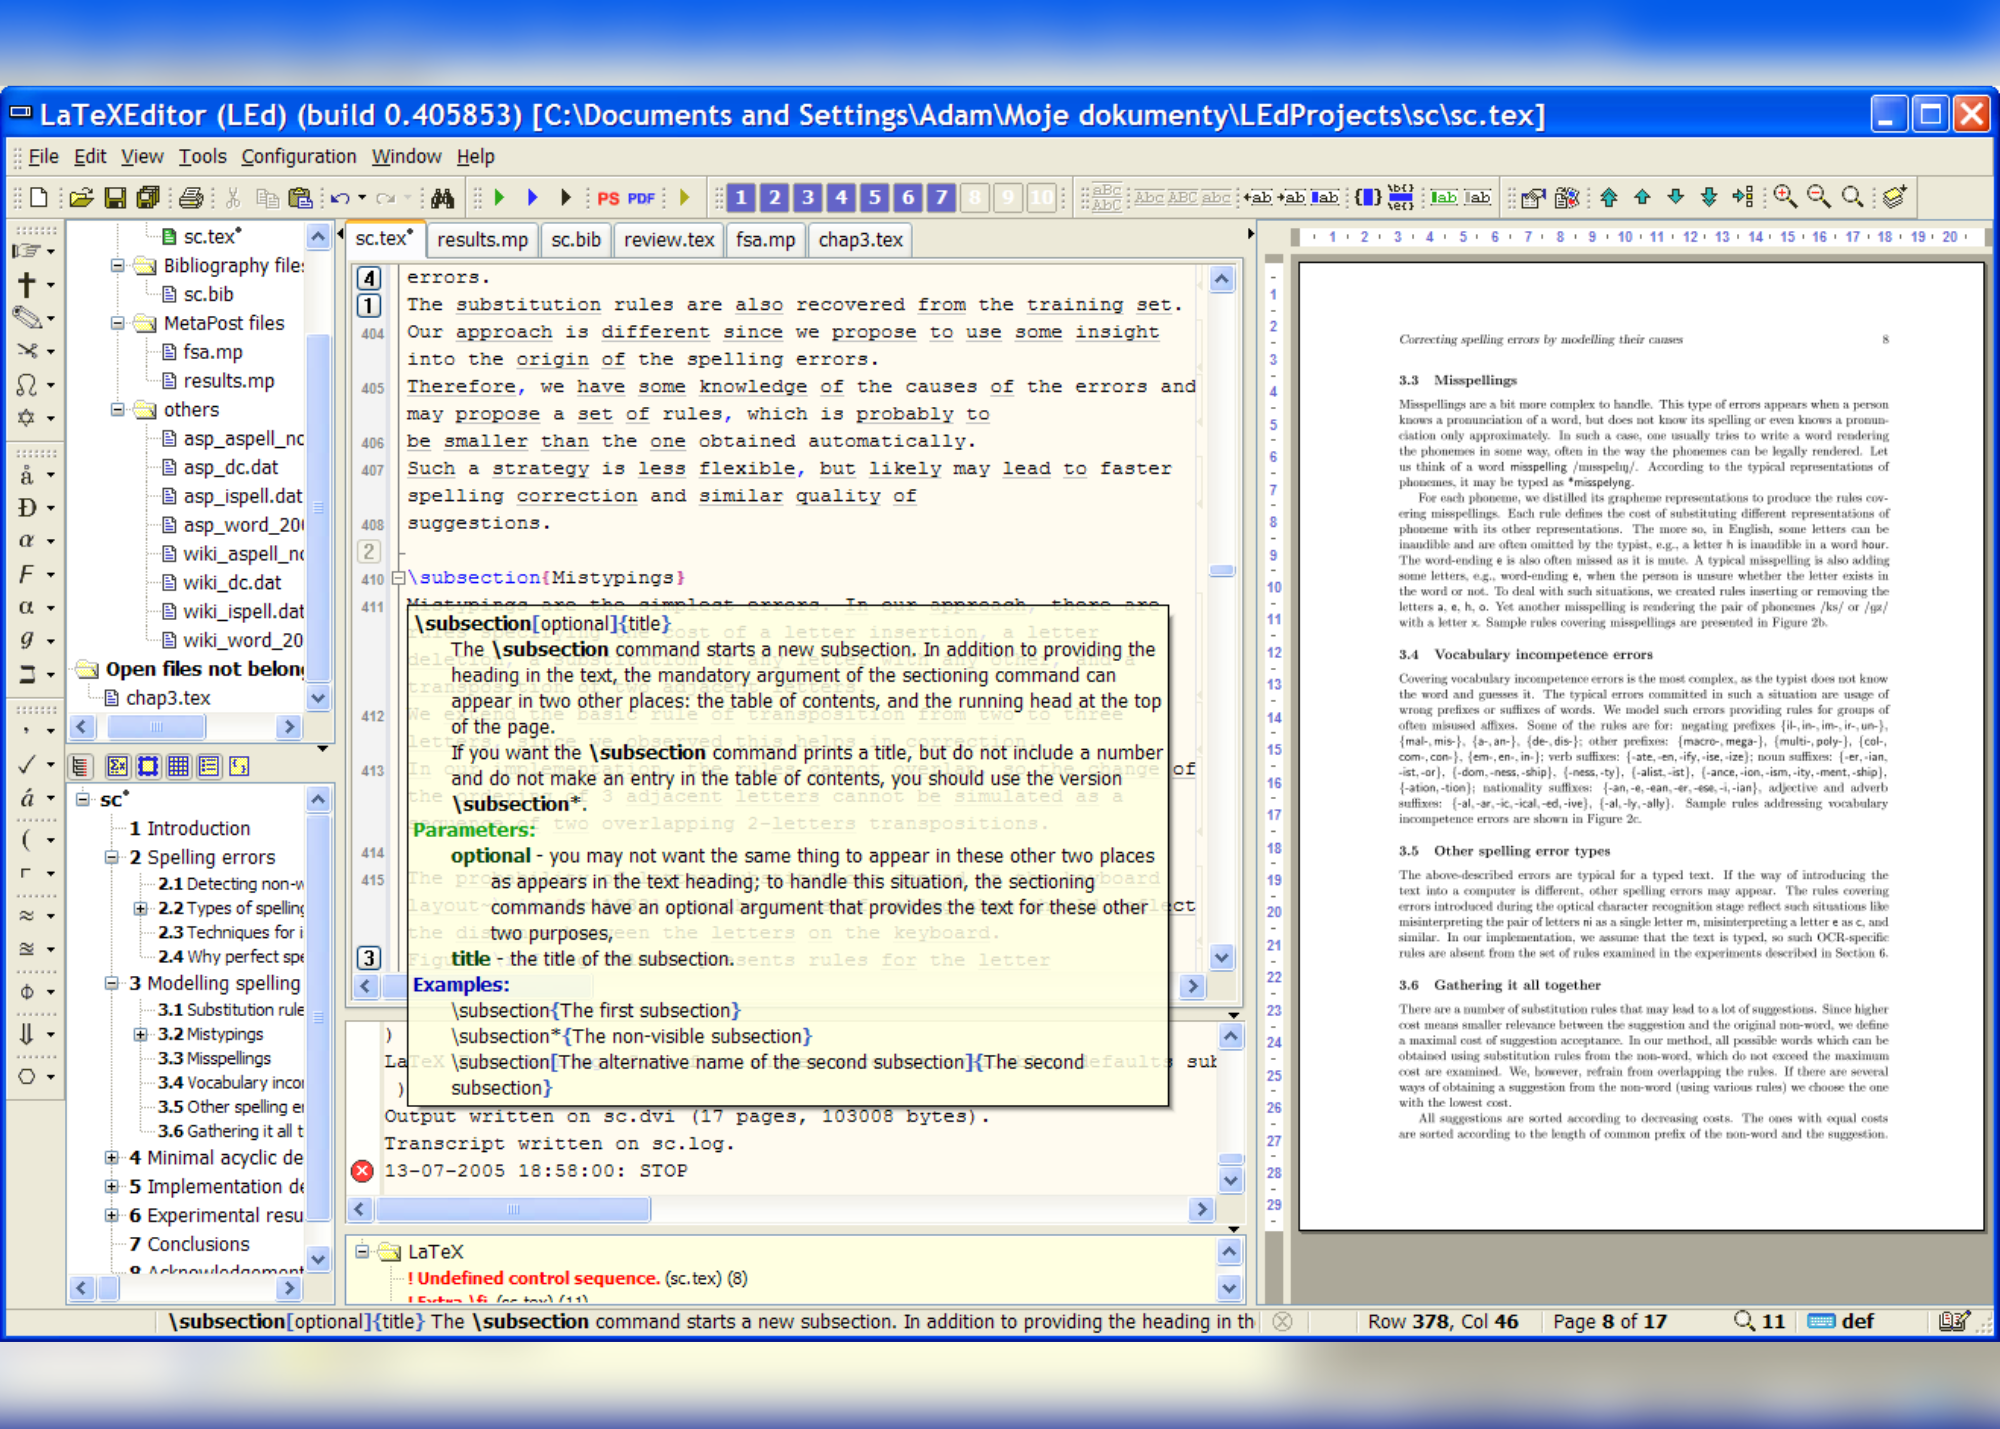 Screenshot showing hints feature of LaTex